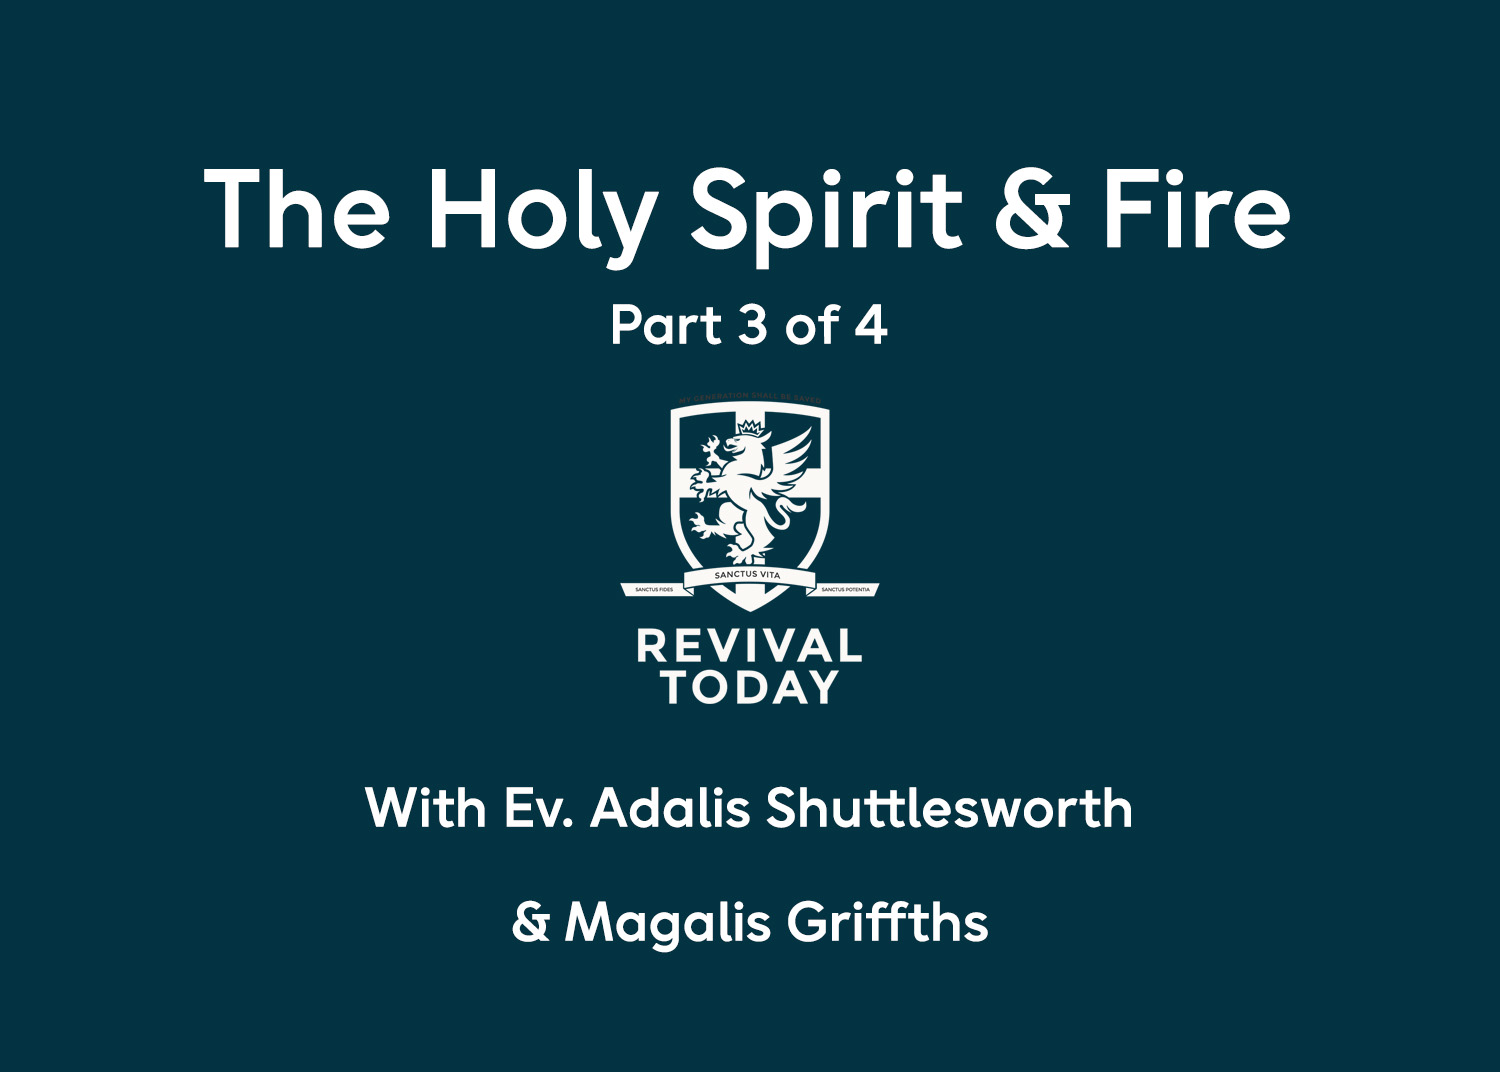 Ev. Adalis Shuttlesworth and Magalis Griffiths teach on the Holy Spirit and Fire, Revival Today